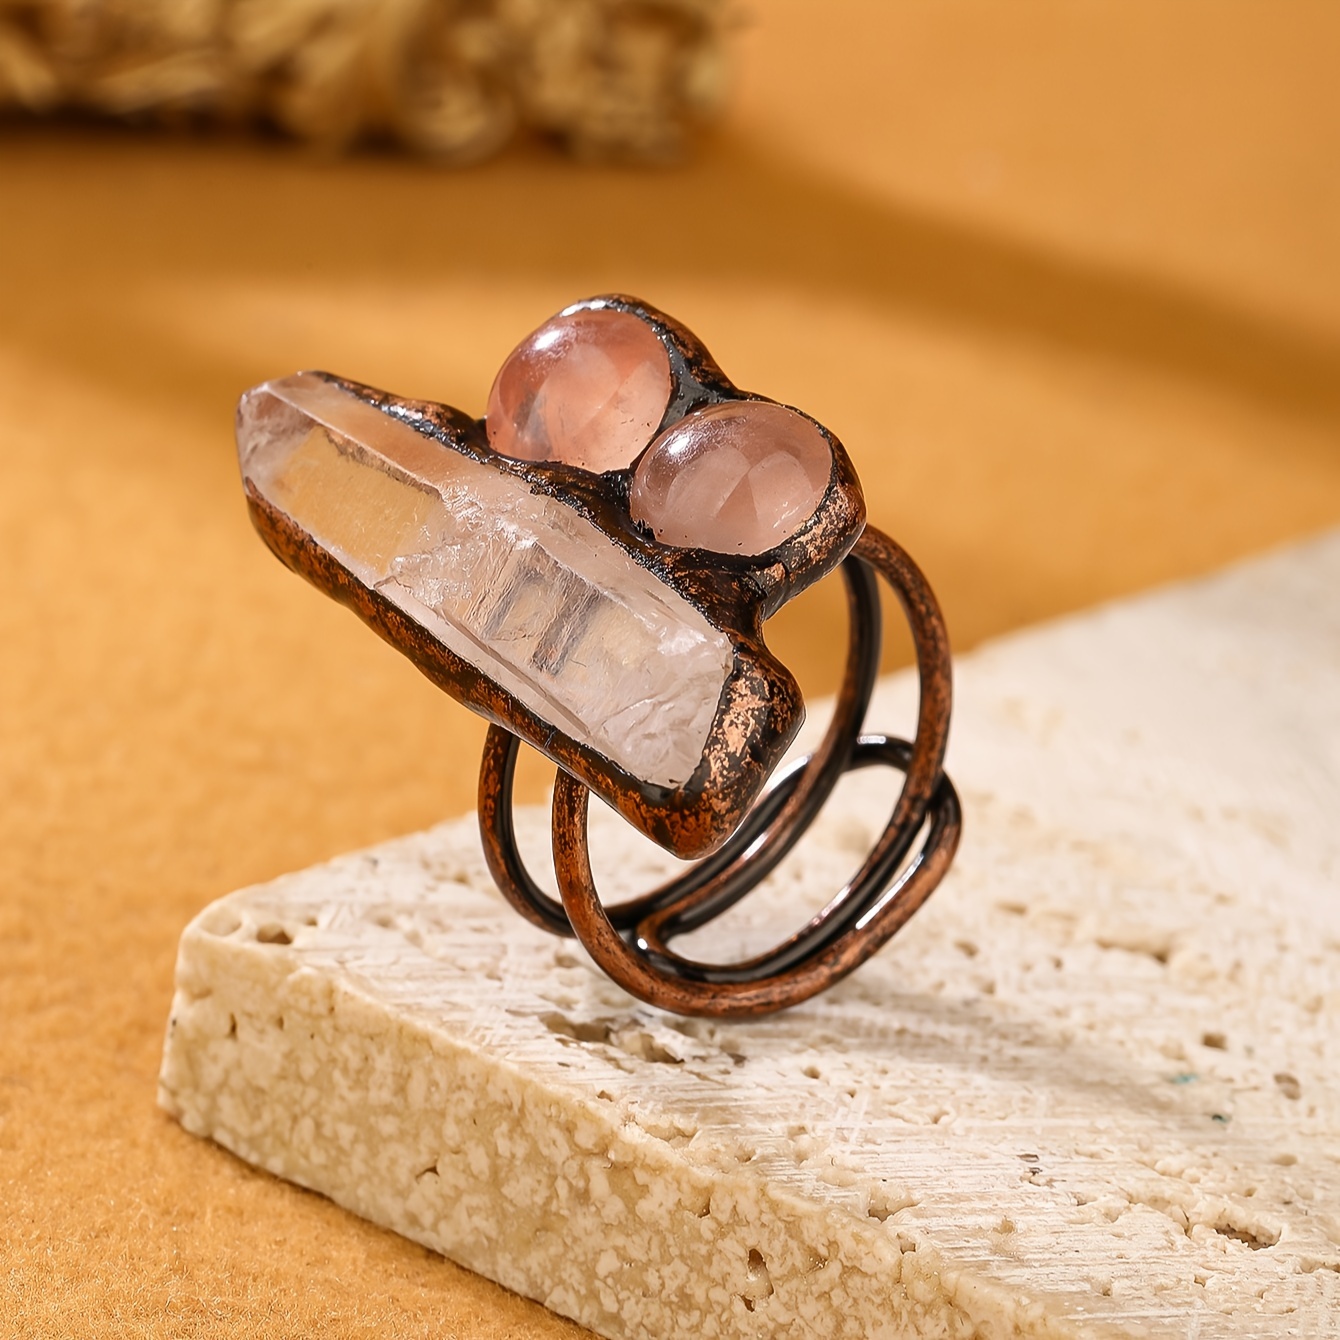 

Vintage Boho Handcrafted Copper Adjustable Cuff Ring With Natural Raw Quartz Hexagonal Column And Rose Quartz Round For Women, Electroplated In Unique Bronze Tone - Ideal For Party, Banquet, Gift